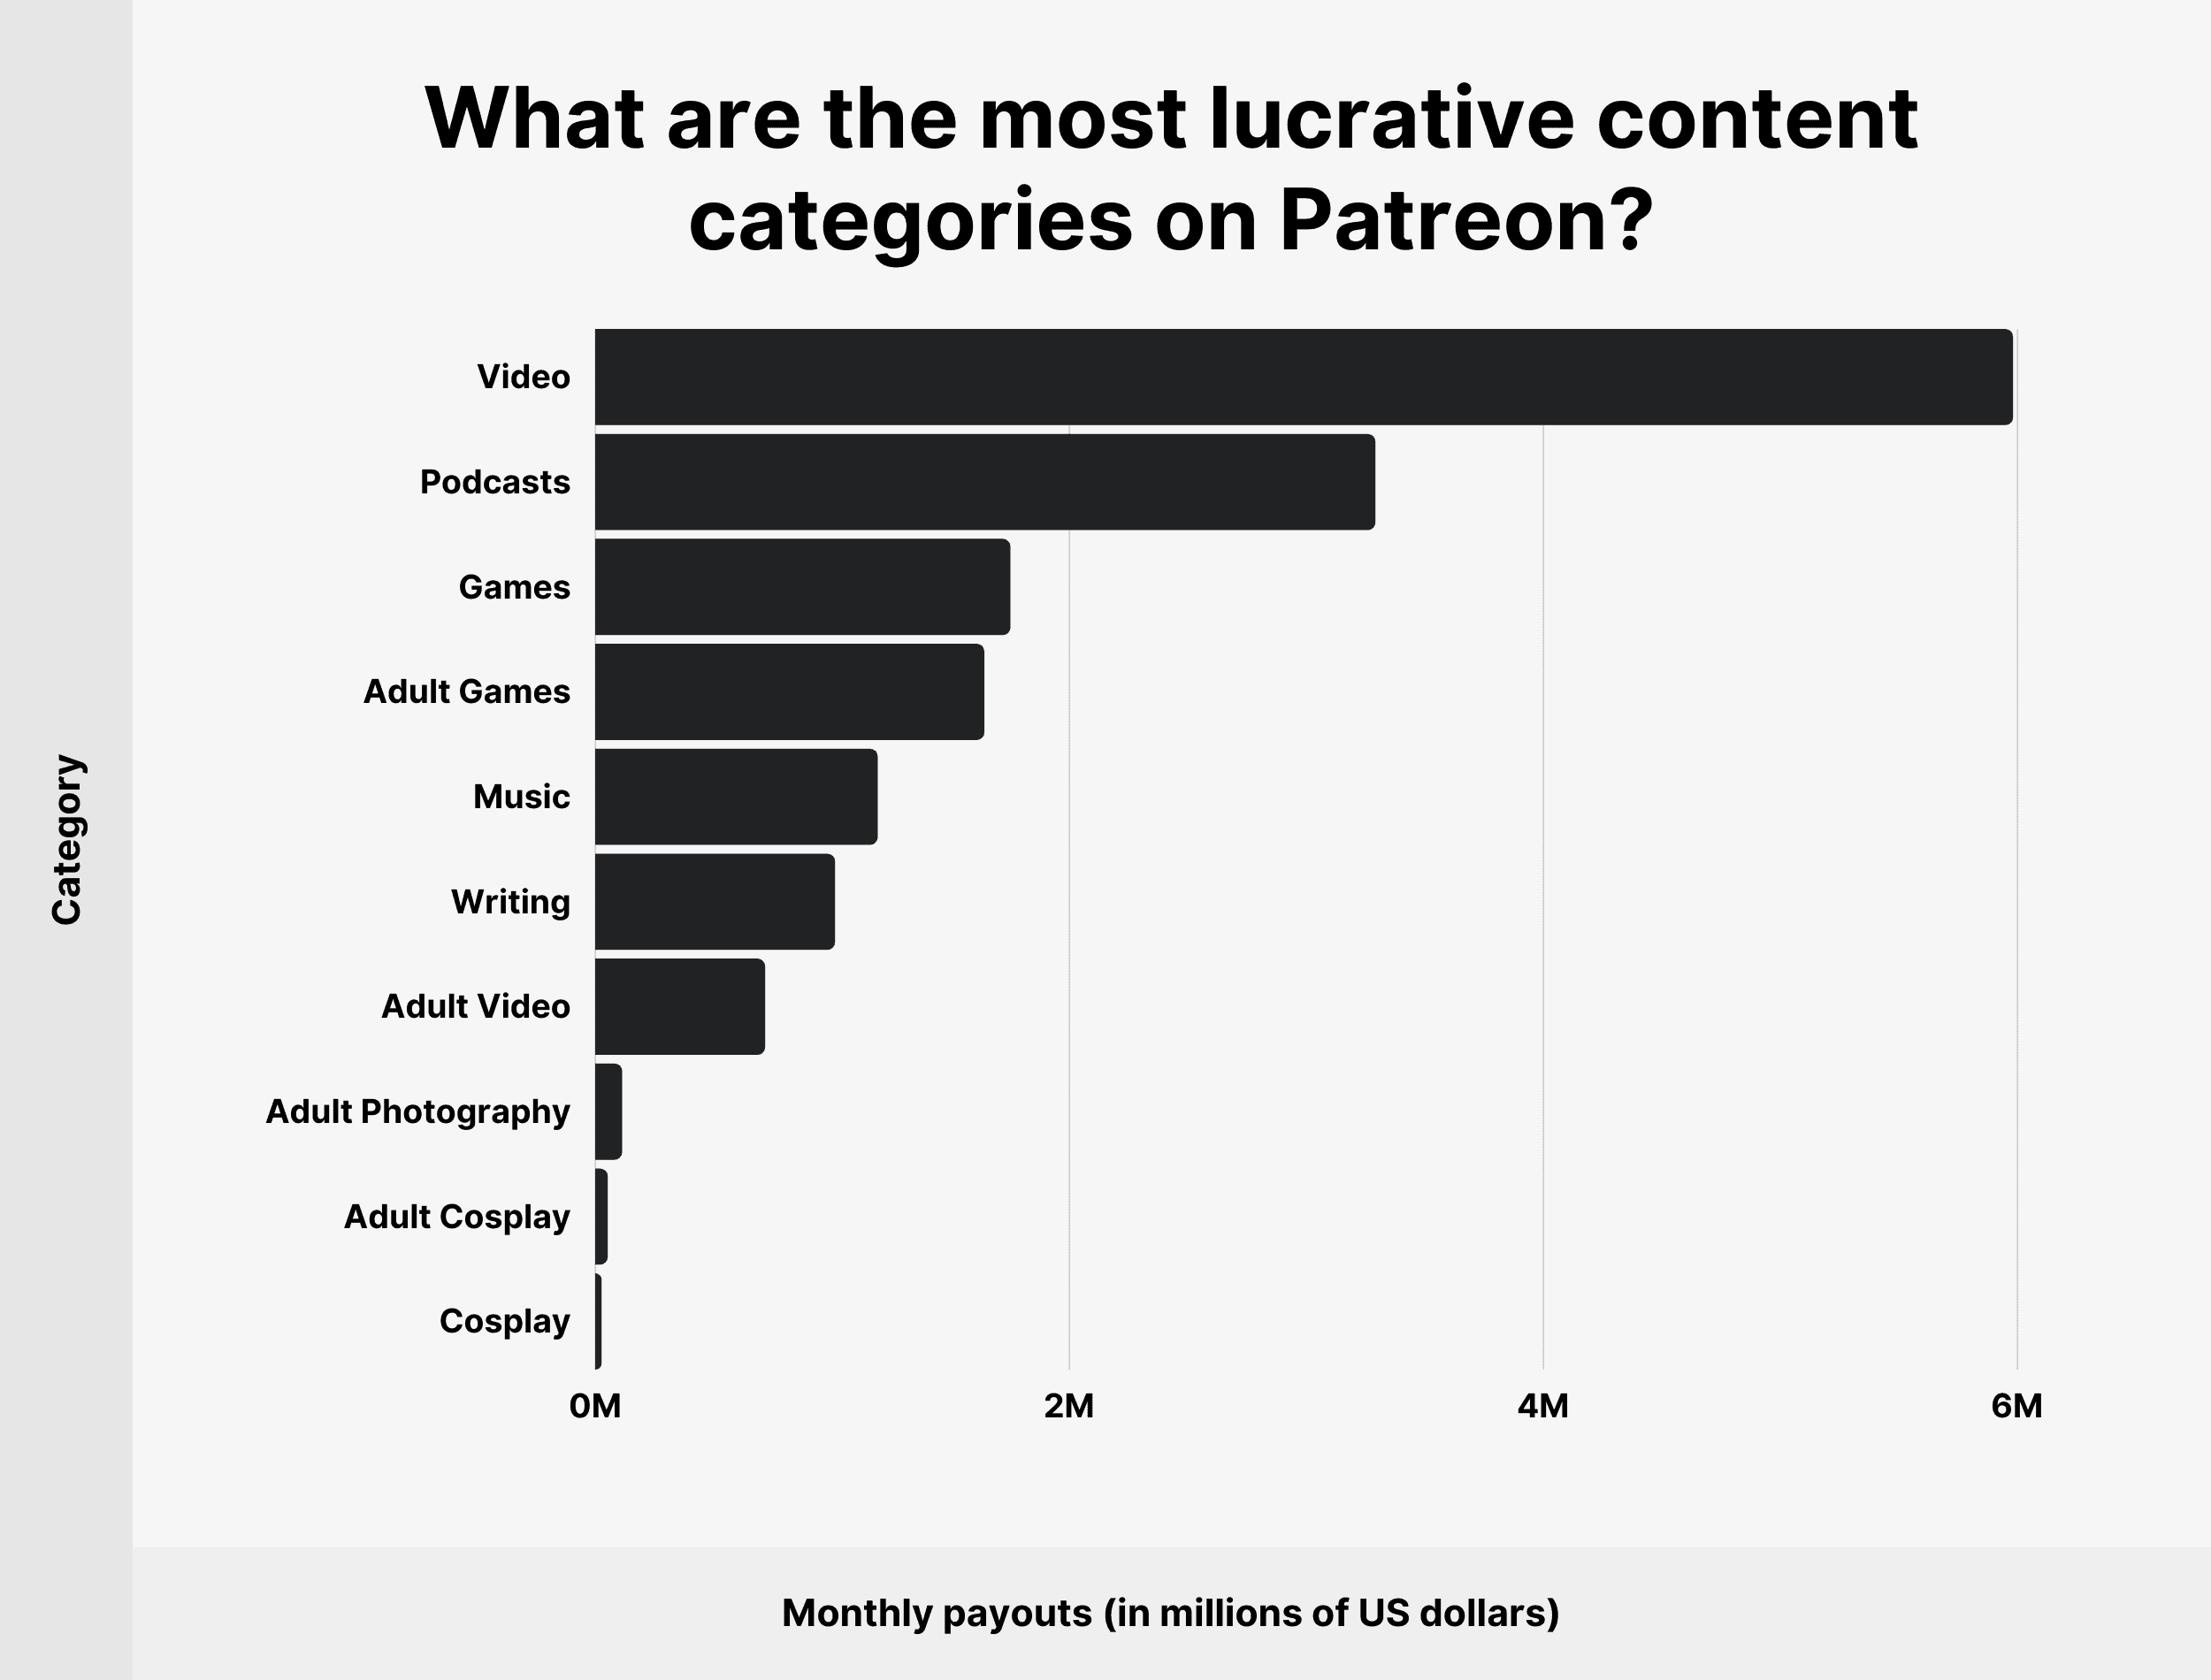 What are the most lucrative content categories on Patreon?